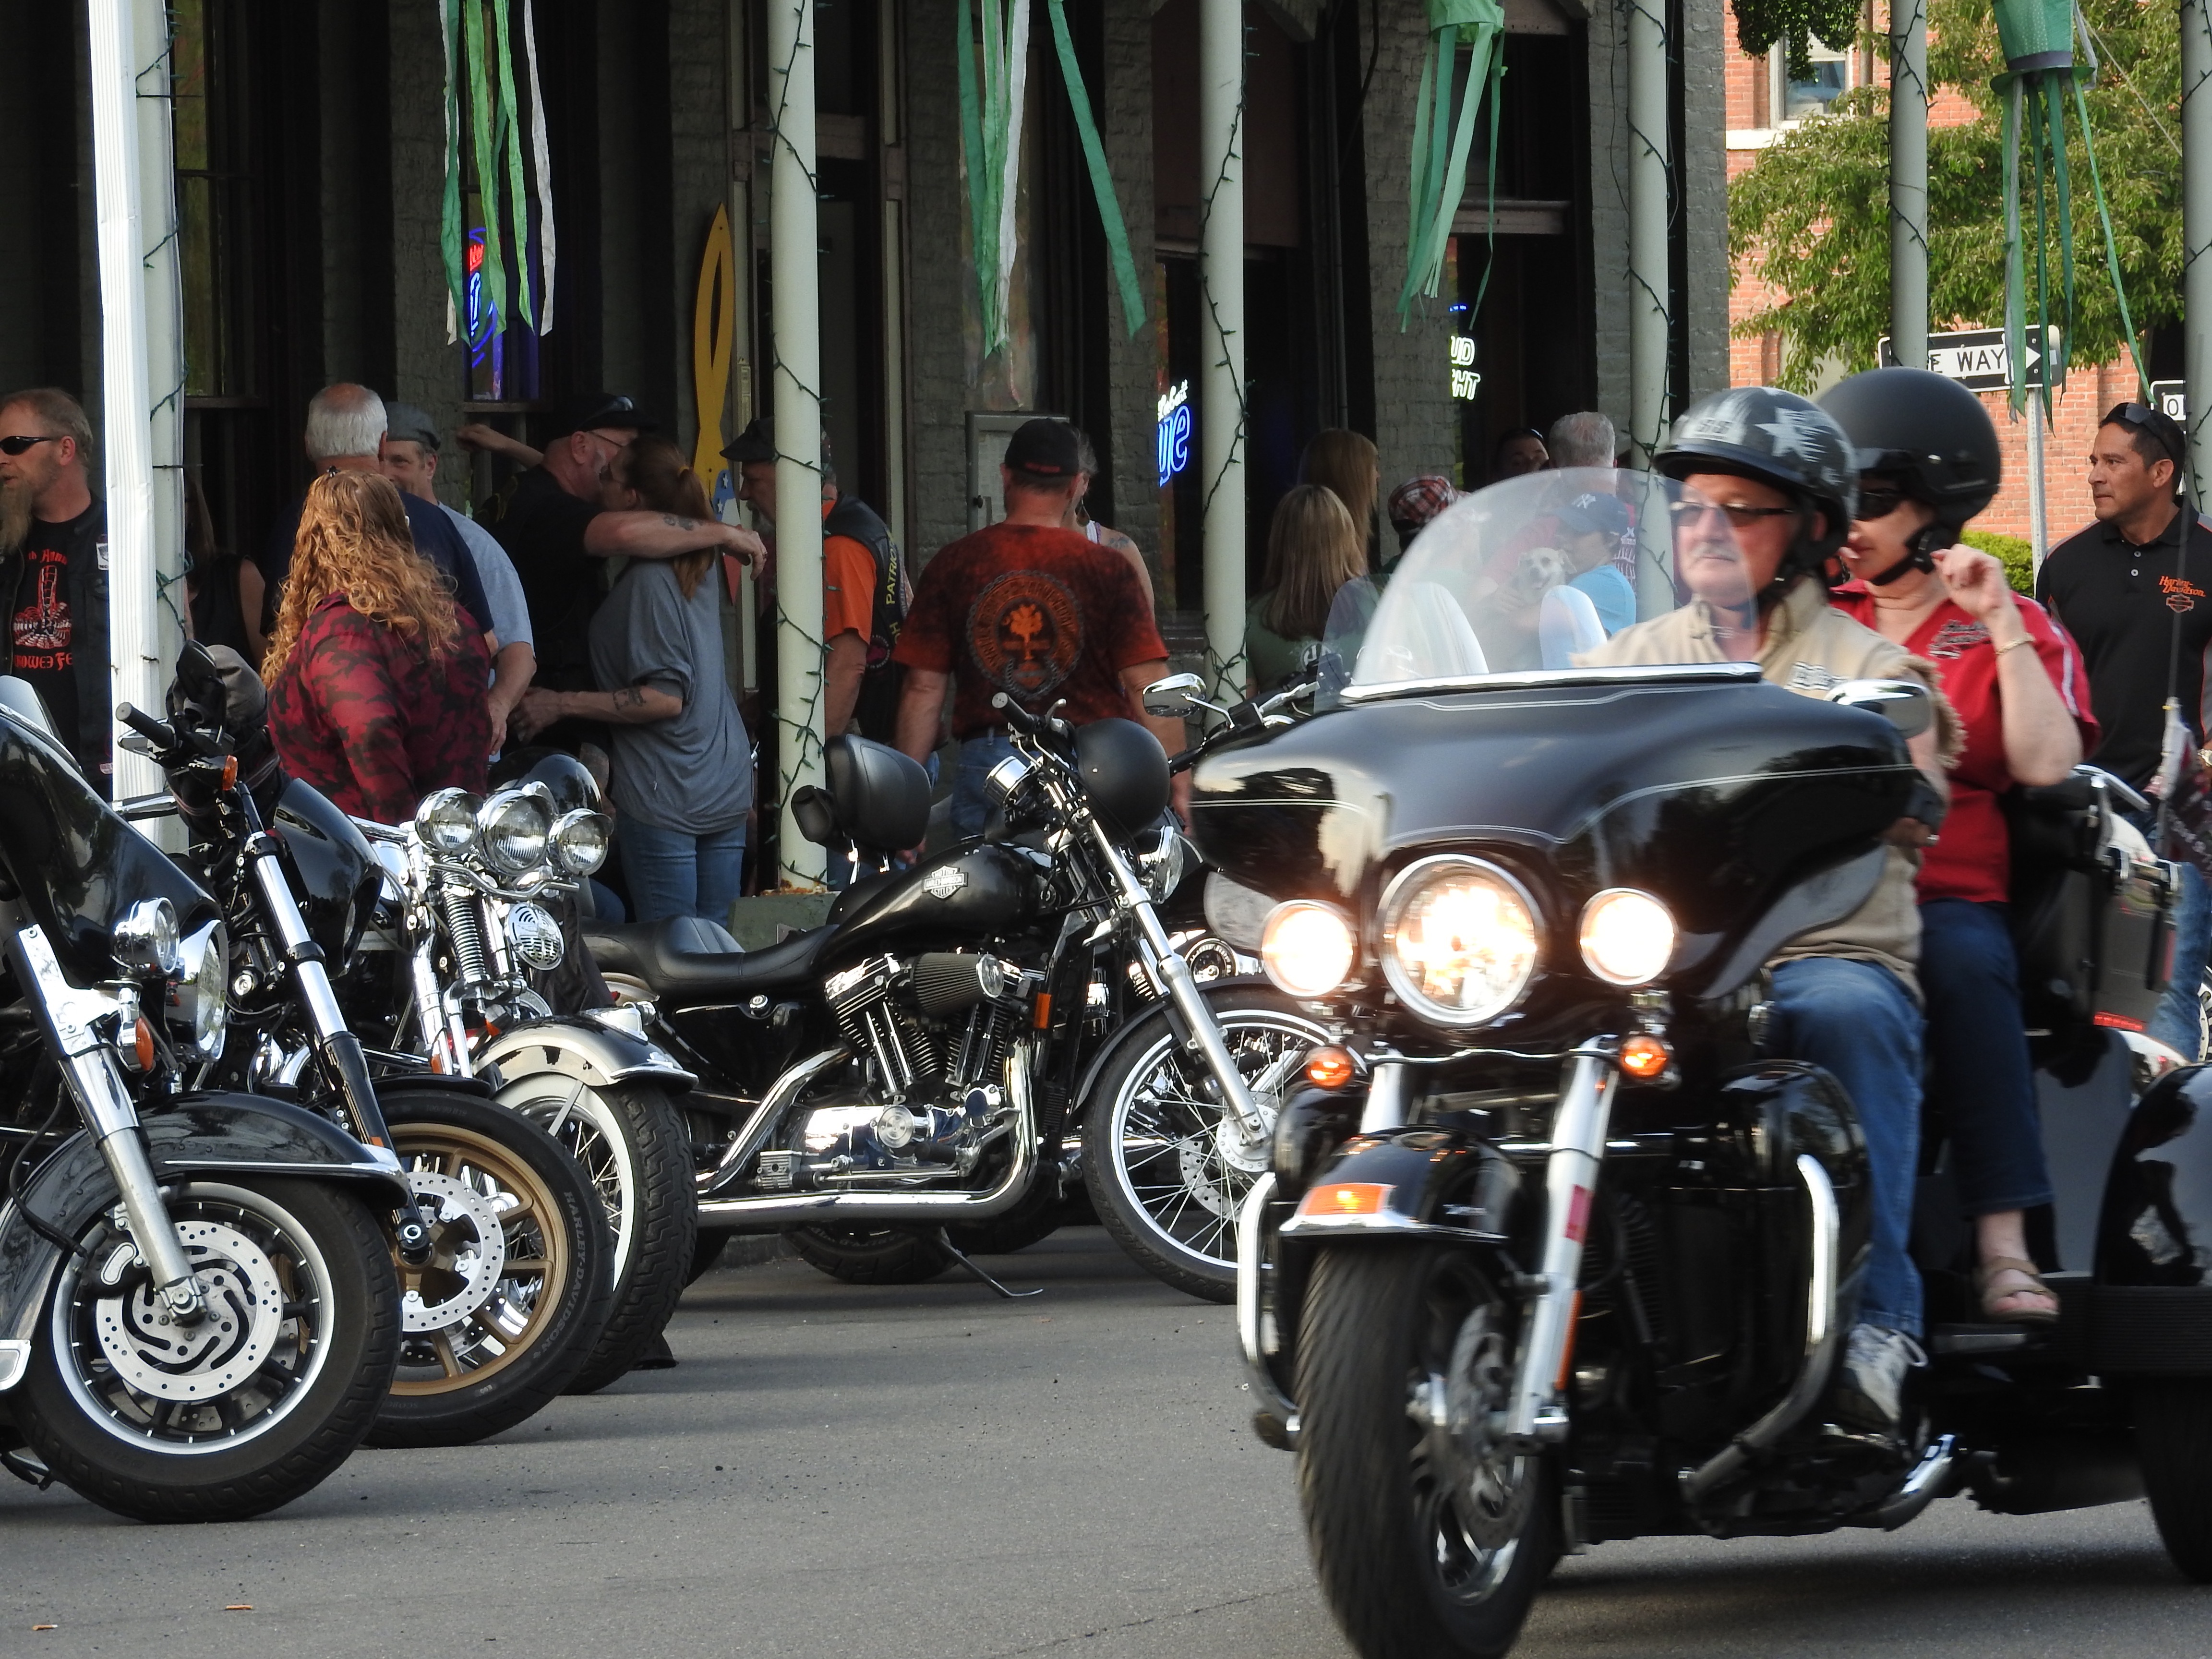 Bike Night in Owego has good turnout on first event of the season